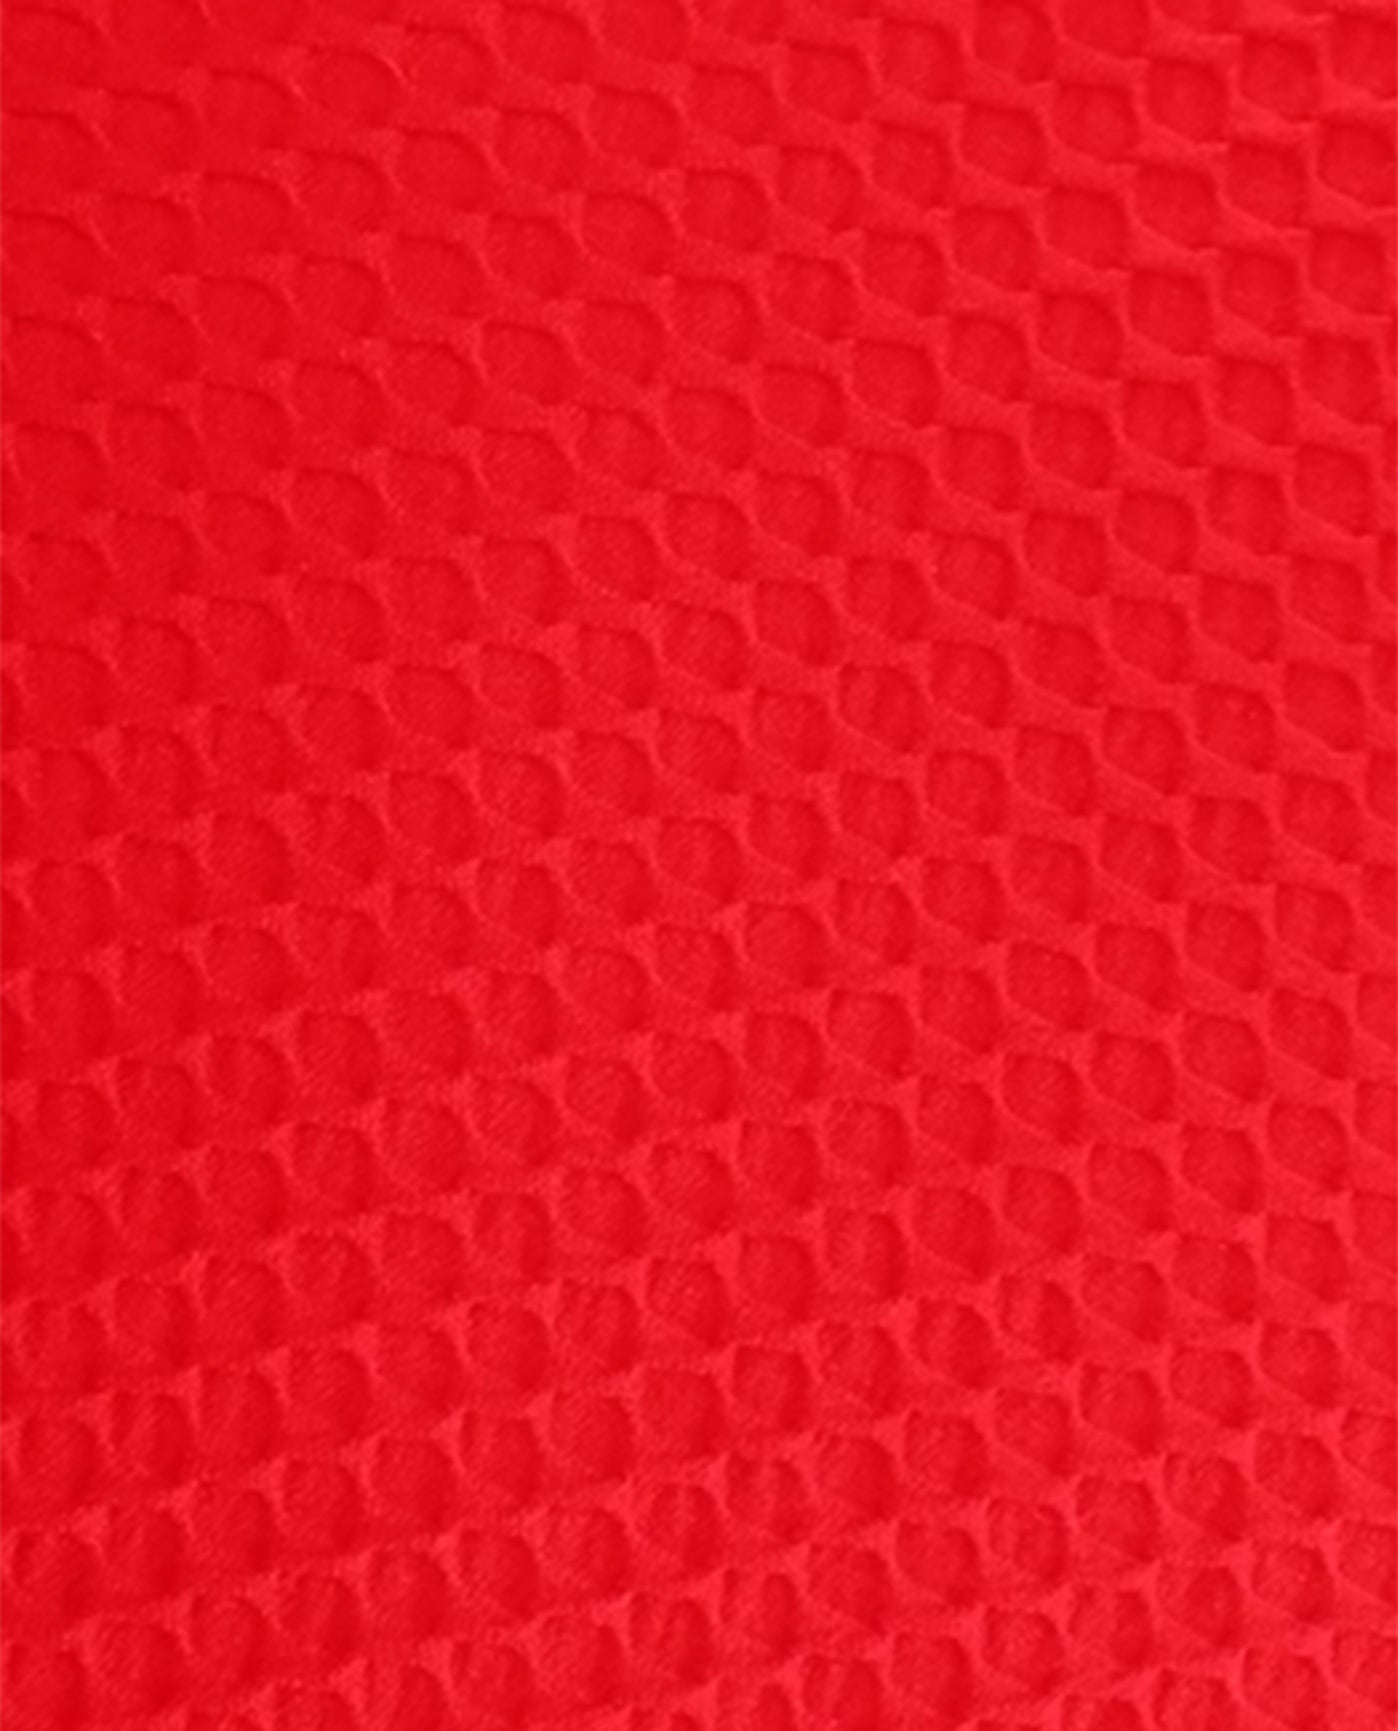 FABRIC SWATCH VIEW OF CHLORINE RESISTANT AQUAMORE COLOR BLOCK TEXTURED TWIST FRONT ONE PIECE SWIMSUIT | 616 AQT TEXTURED SCARLET